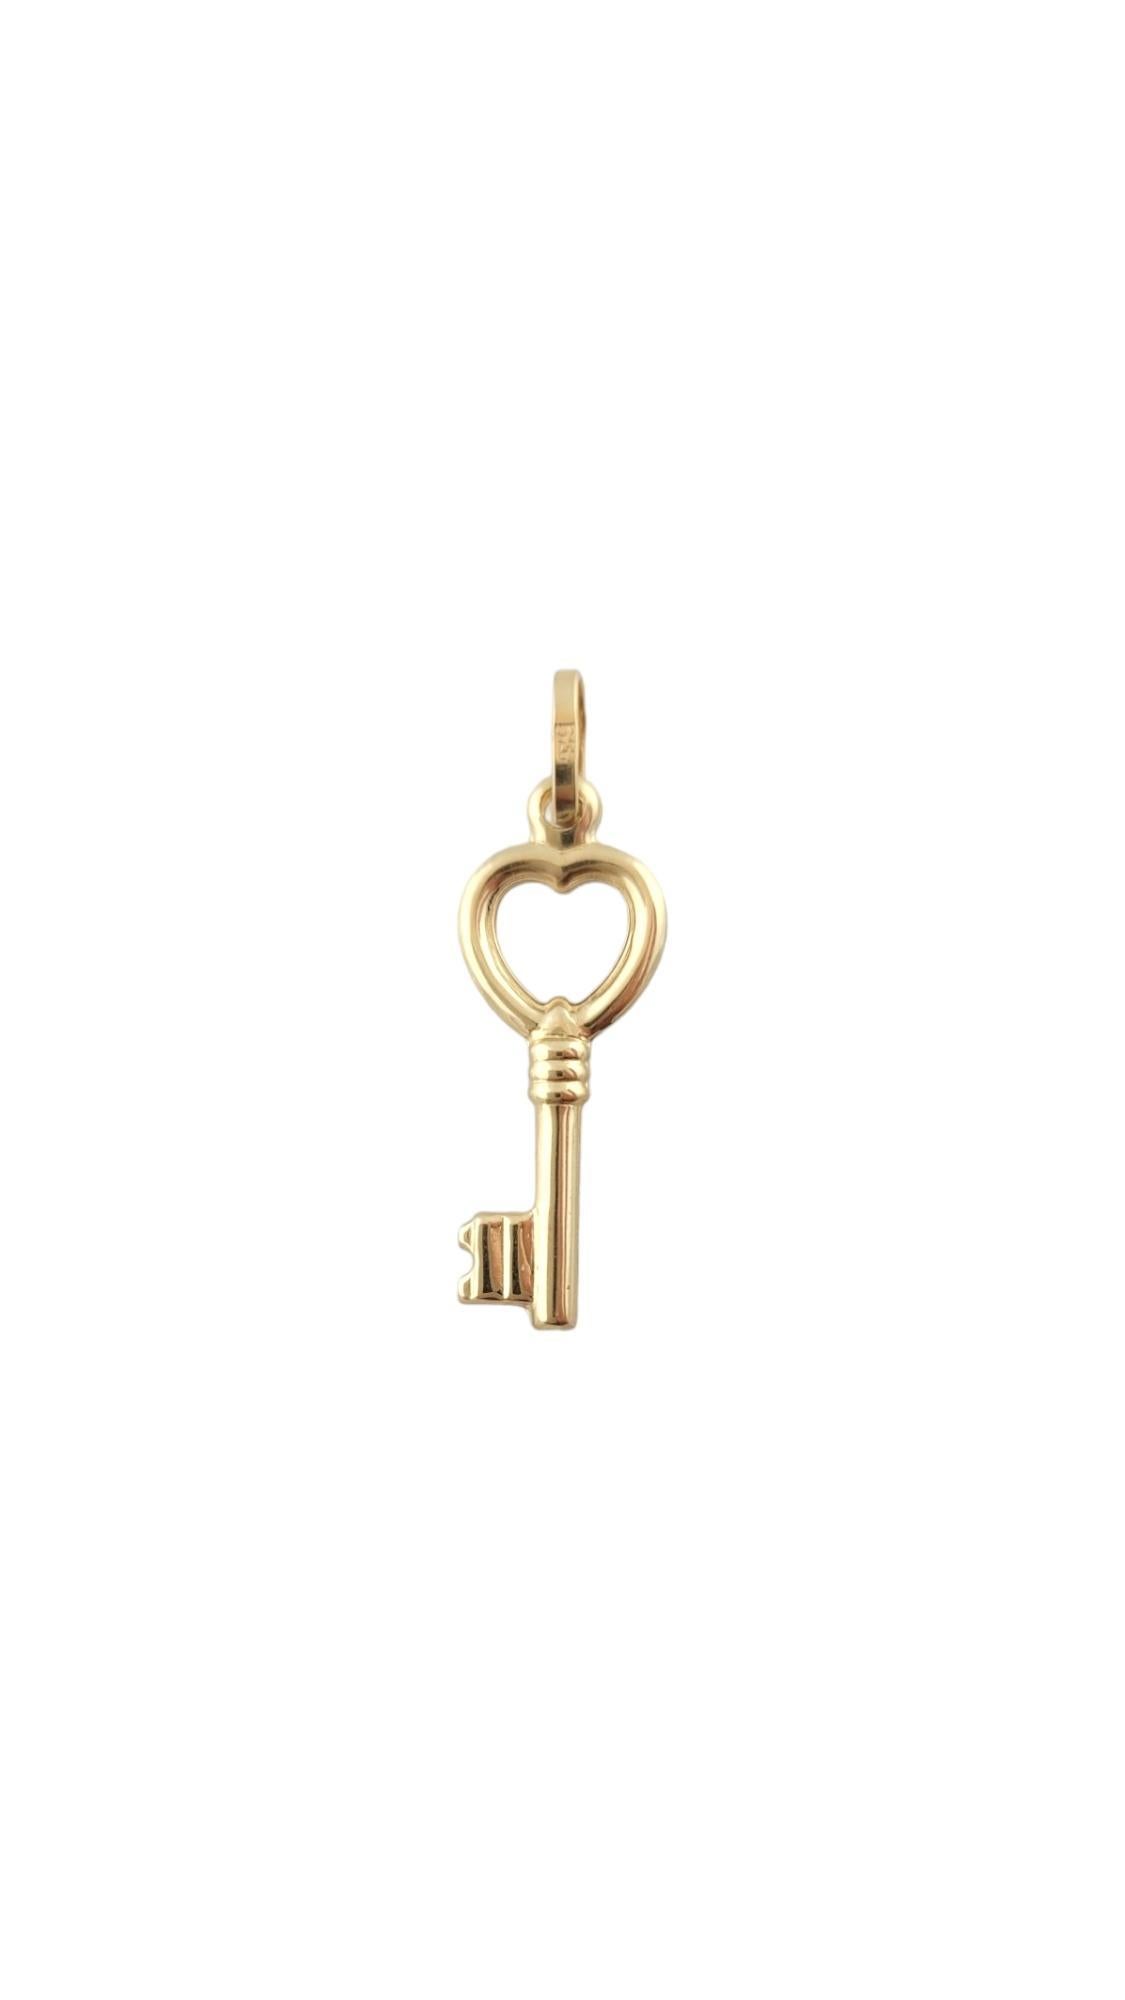 Vintage 14K Yellow Gold Key to my Heart Pendant -

Unlock a world of style with this key charm that is crafted with intricate details. 

Size: 22.3mm X 9.6mm 

Weight: .93 g/ 0.6dwt

Hallmark: 14KT ITALY EG

*Chain not included*

Very good